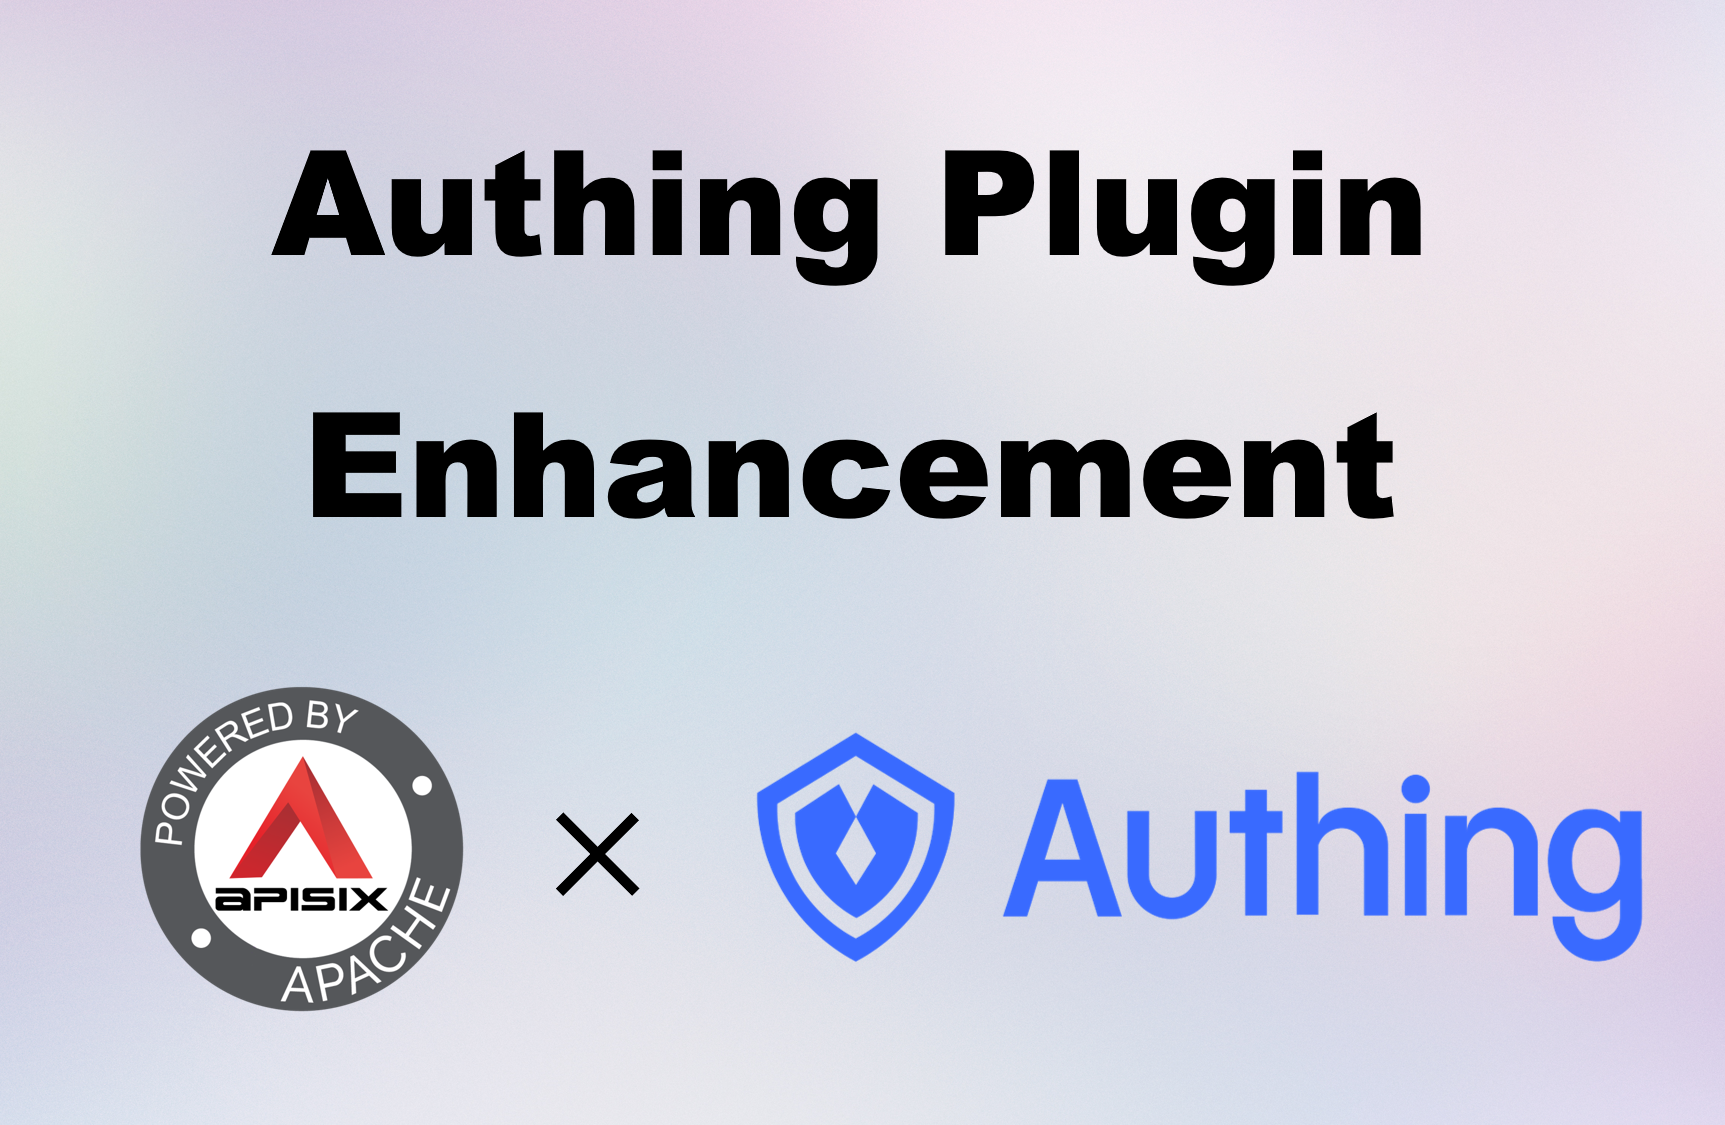 Using Apache APISIX and Authing to implement Centralized Authentication Management